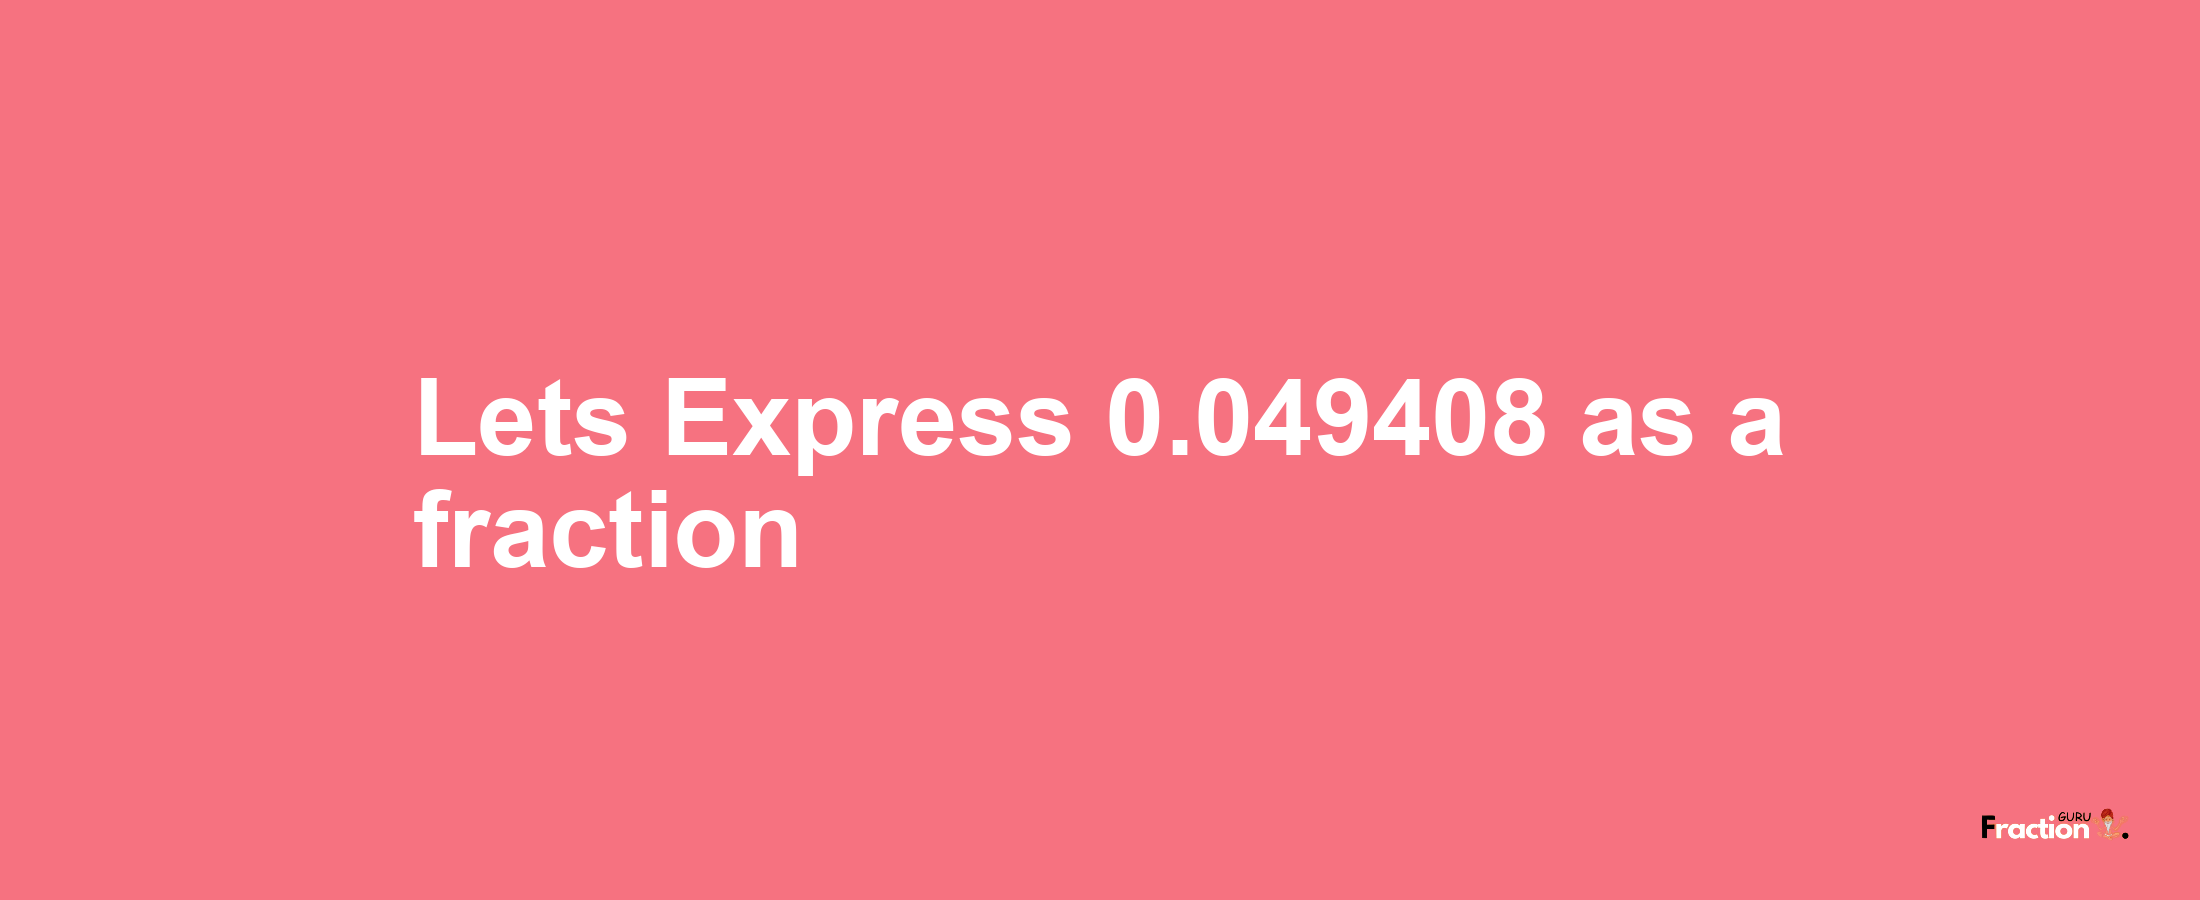 Lets Express 0.049408 as afraction